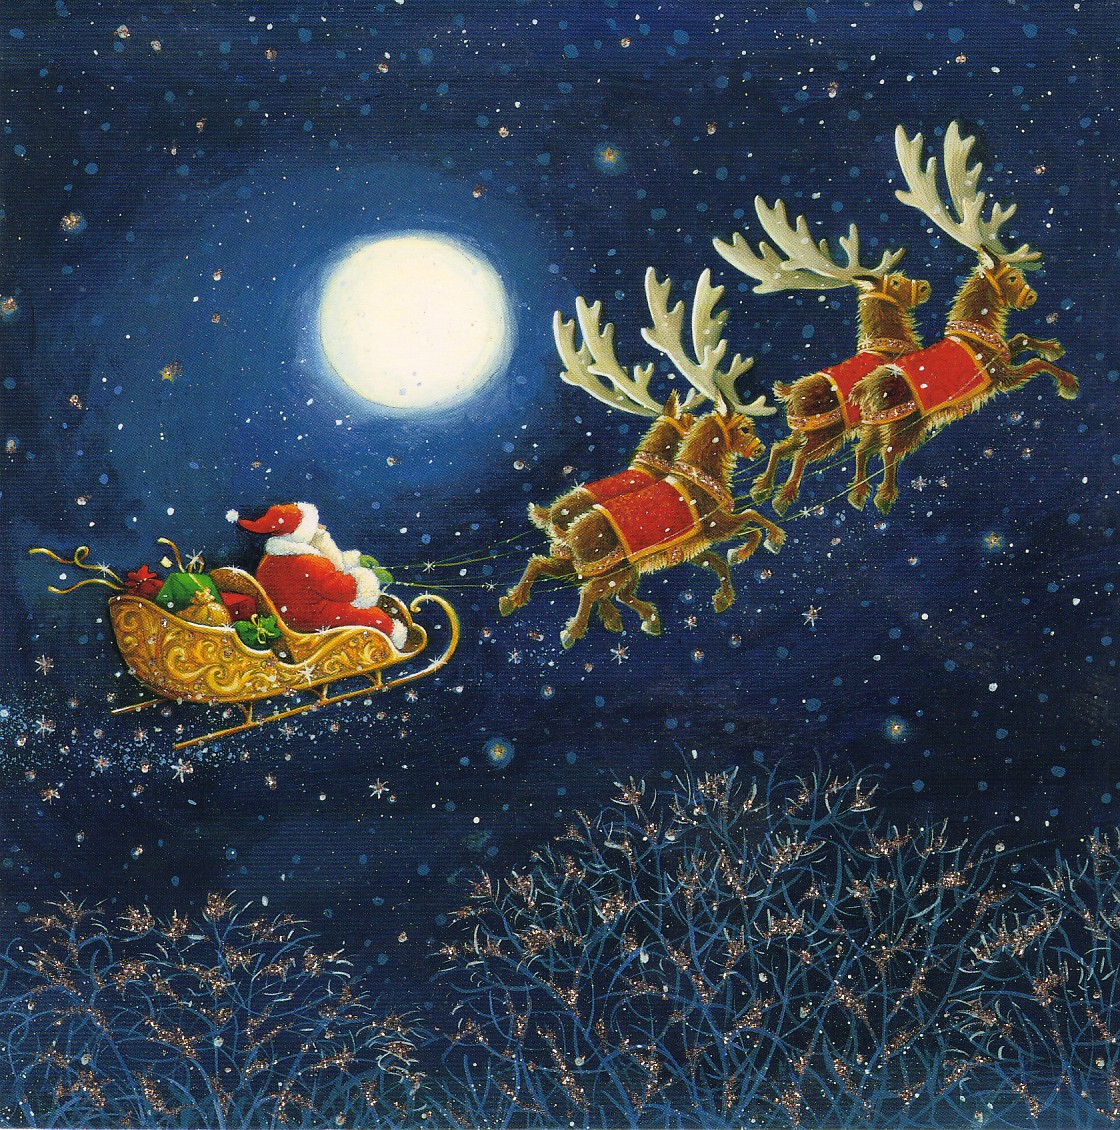 Santa Claus Still Busy On His Travels